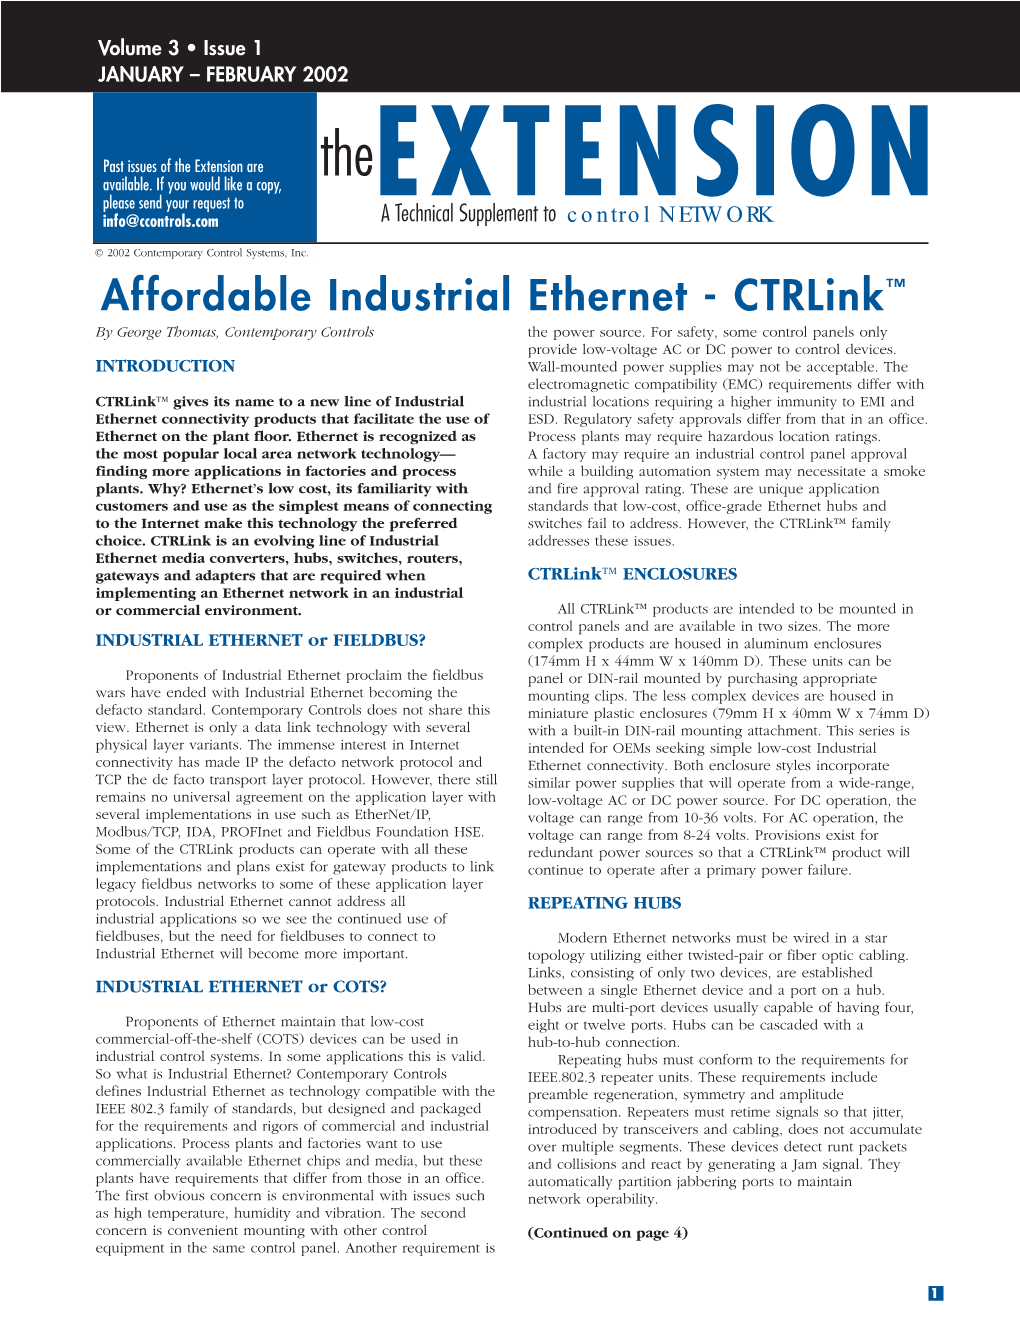 Affordable Industrial Ethernet - Ctrlink™ by George Thomas, Contemporary Controls the Power Source